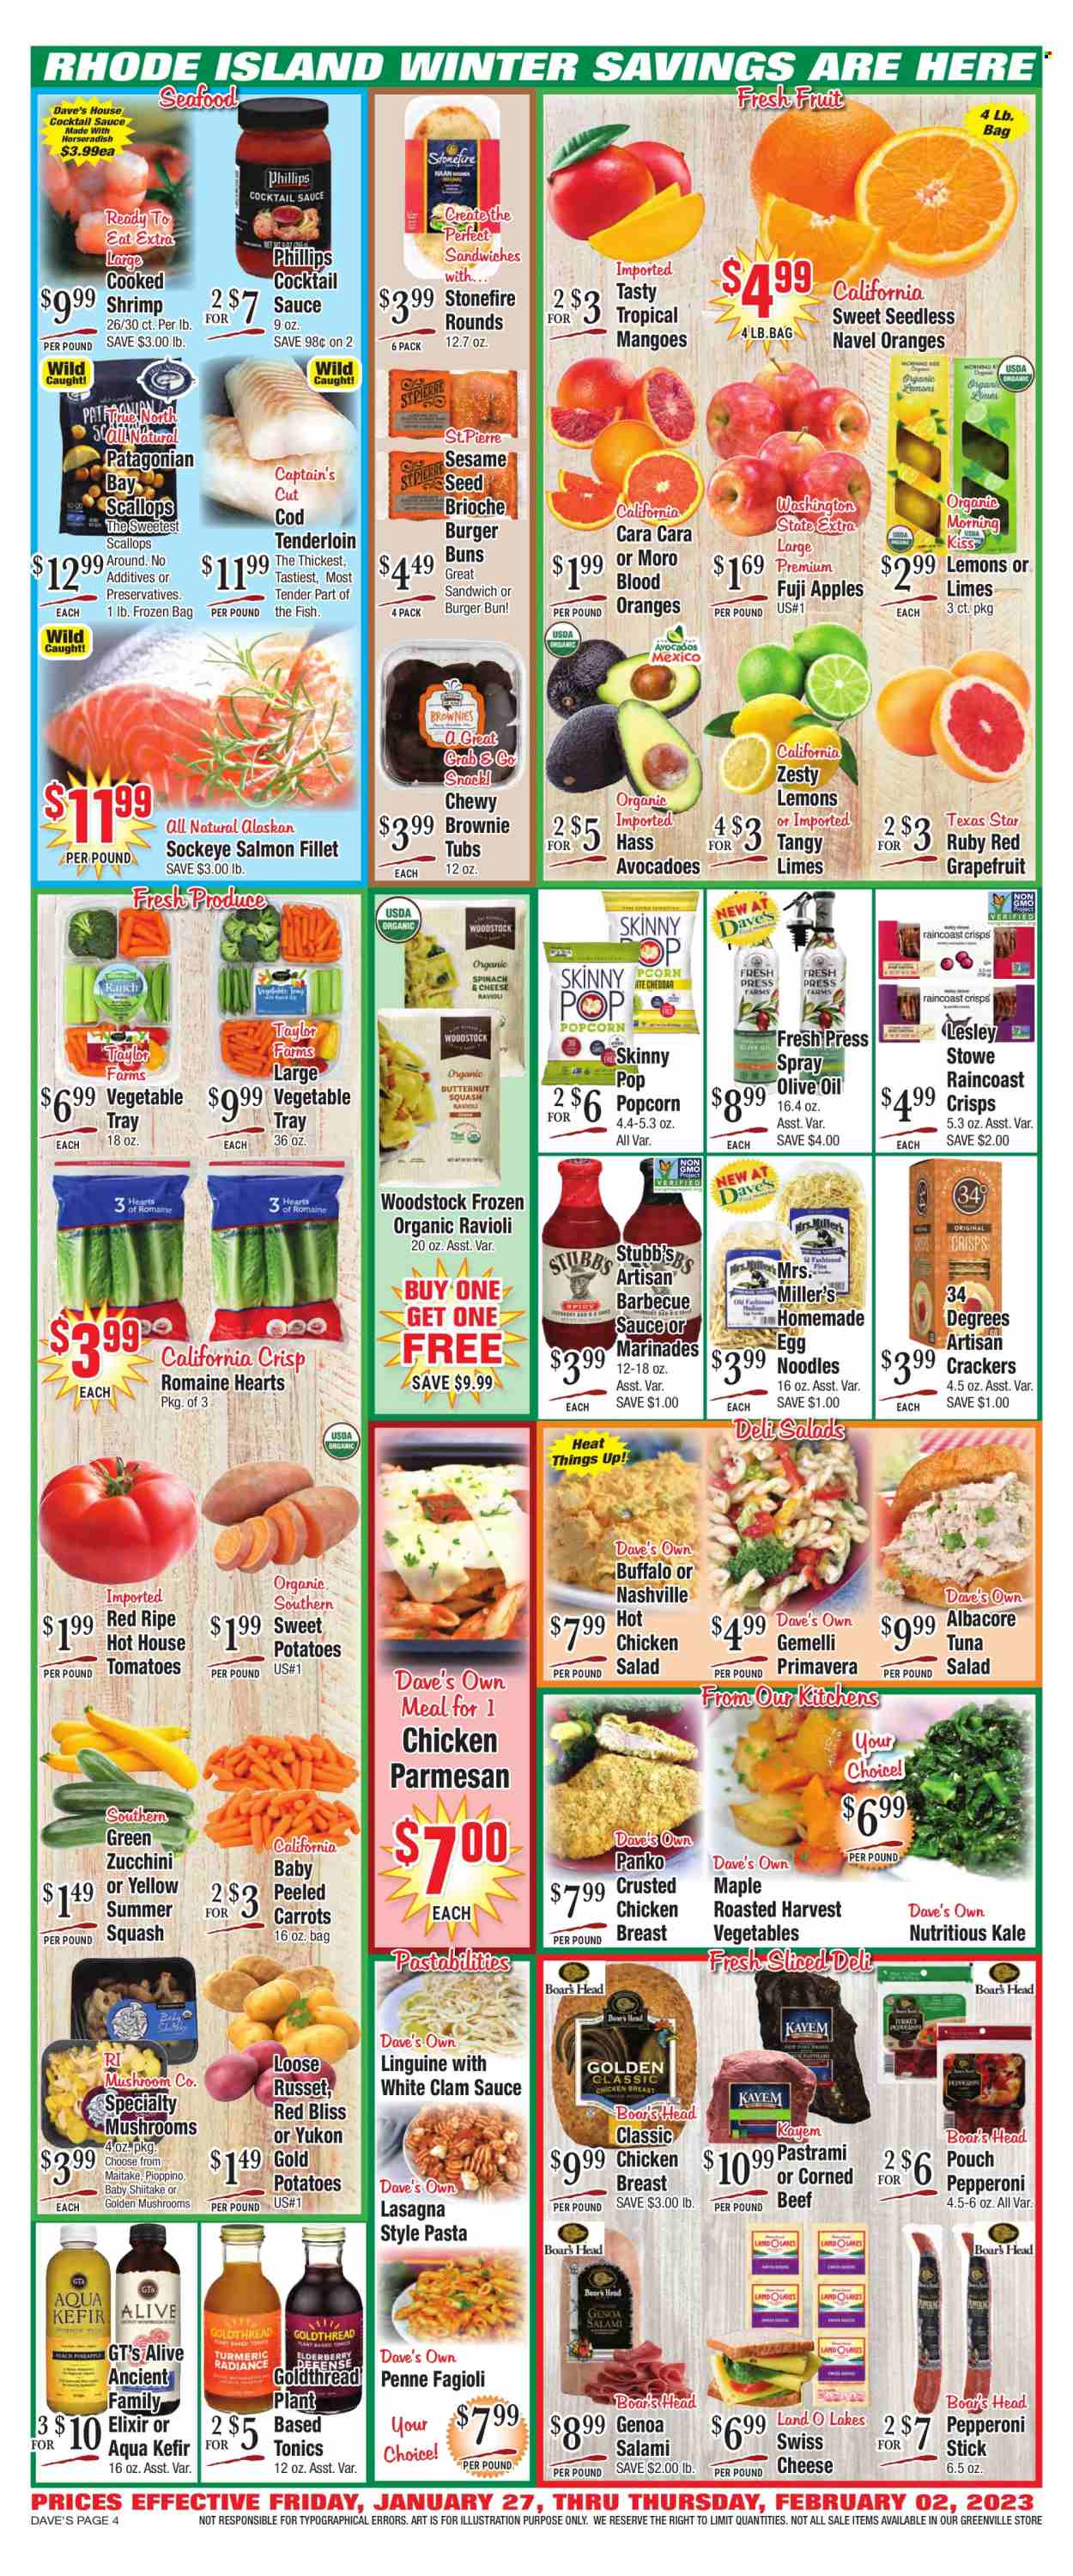 thumbnail - Dave's Fresh Marketplace Flyer - 01/27/2023 - 02/02/2023 - Sales products - mushrooms, buns, burger buns, brioche, brownies, panko breadcrumbs, carrots, russet potatoes, sweet potato, tomatoes, zucchini, horseradish, kale, potatoes, salad, apples, grapefruits, limes, oranges, Fuji apple, clams, cod, salmon, salmon fillet, scallops, tuna, seafood, fish, shrimps, ravioli, sandwich, pasta, noodles, lasagna meal, salami, pastrami, pepperoni, tuna salad, chicken salad, swiss cheese, cheese, kefir, snack, crackers, popcorn, Skinny Pop, sesame seed, egg noodles, penne, BBQ sauce, cocktail sauce, olive oil, oil, chicken breasts, beef meat, lemons, navel oranges. Page 4.